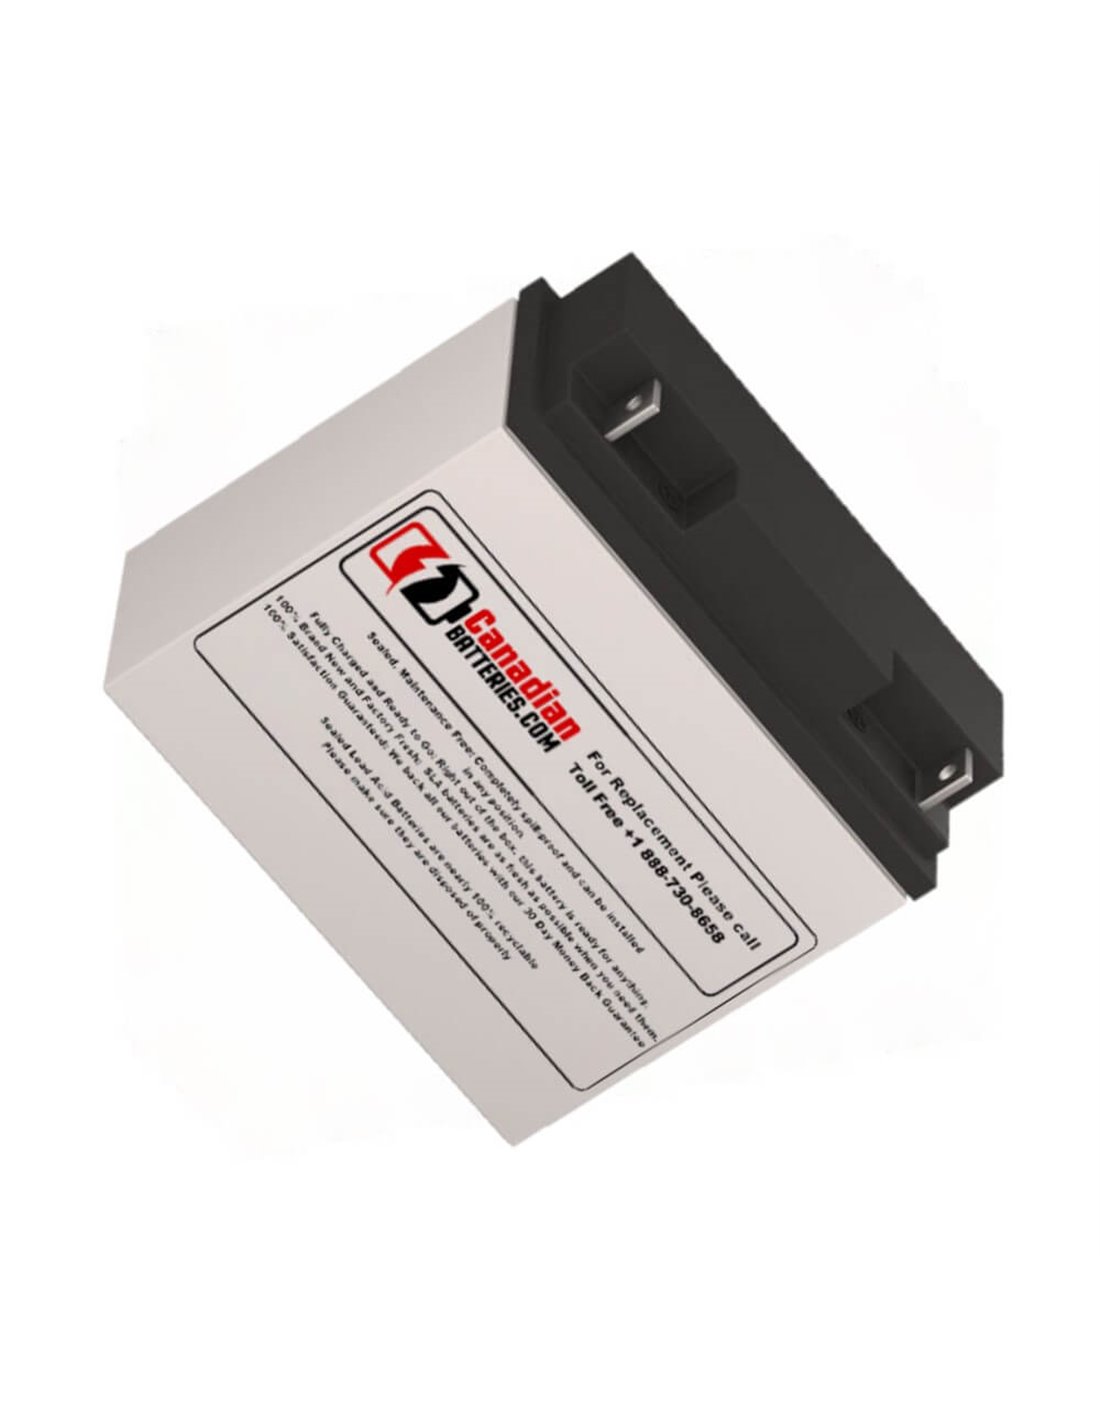 Battery for Powerware 153302033 UPS, 1 x 12V, 18Ah - 216Wh